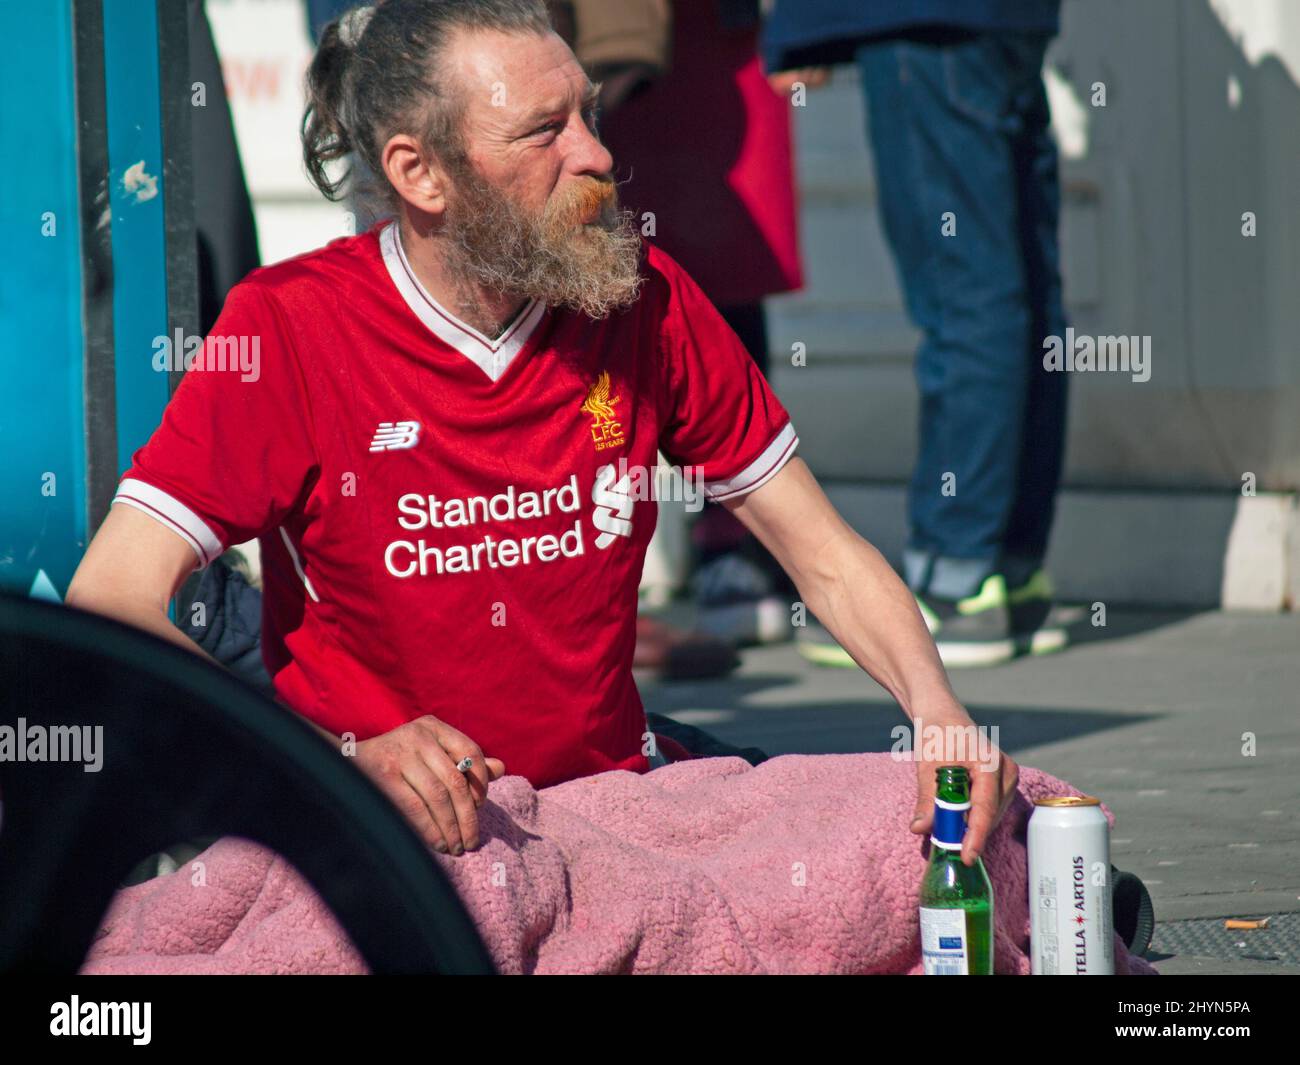 A Liverpool football fan down on his luck in Brighton Stock Photo